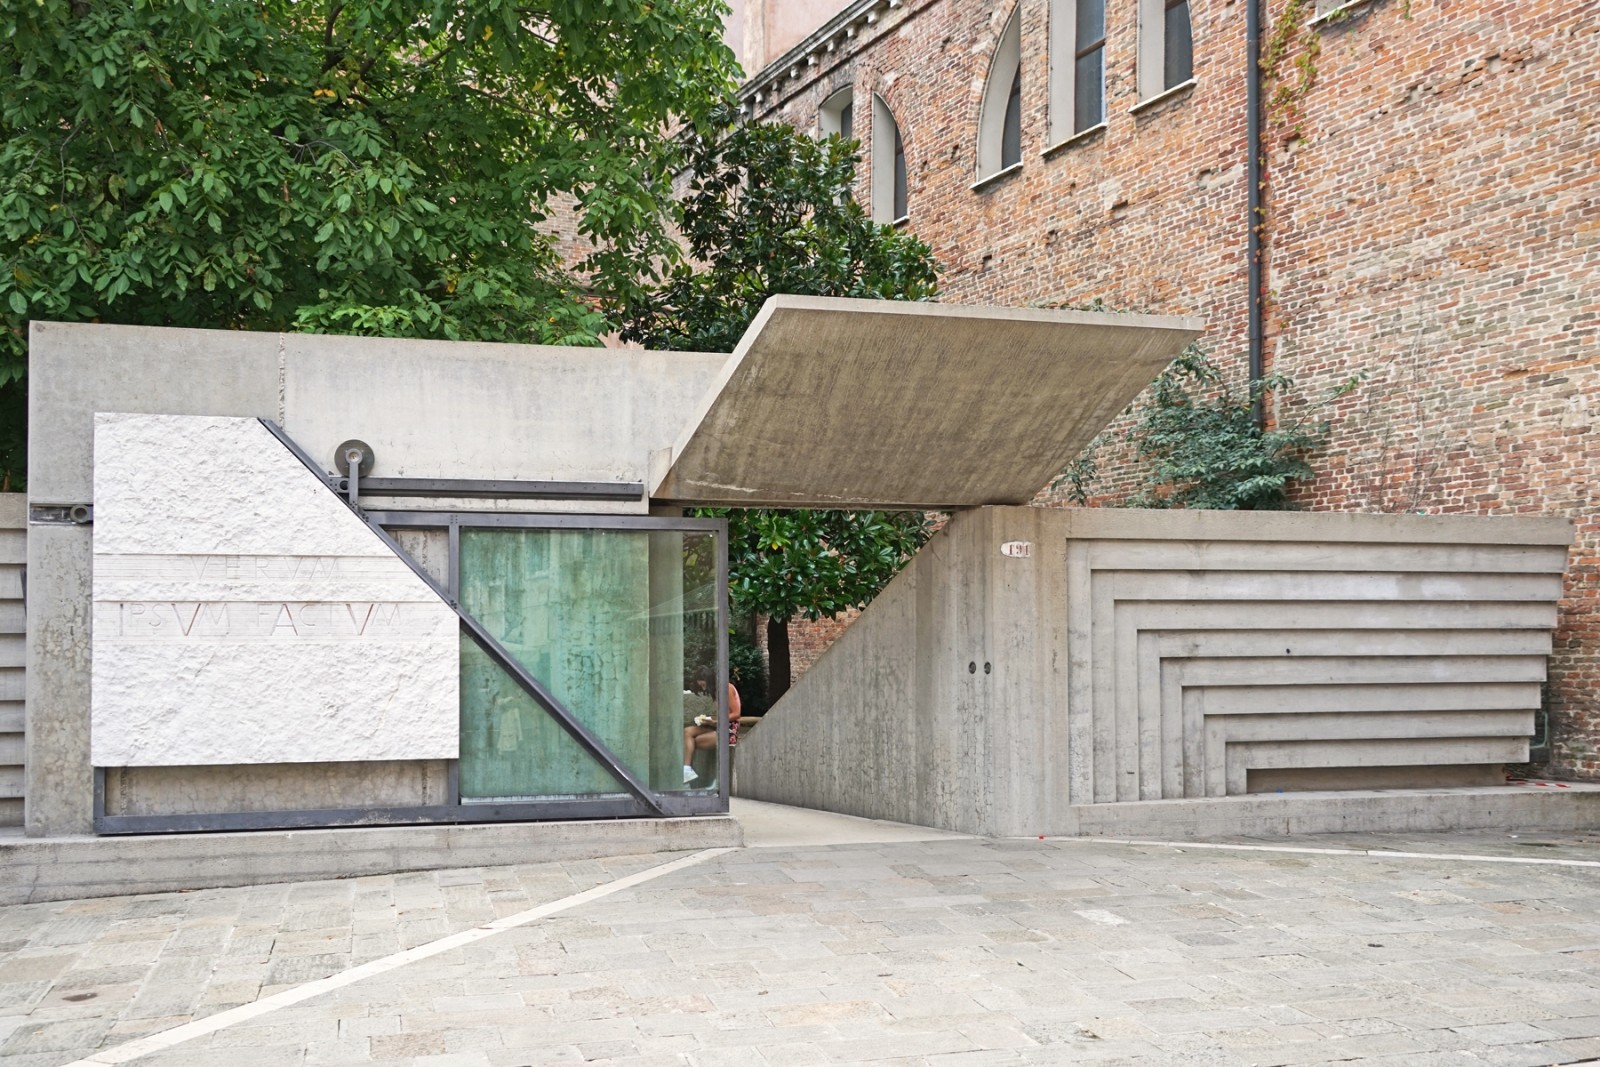 Entrance to the sede dei Tolentini of the IUAV university of architecture in Venice (Italy), Carlo Scarpa, architect, constructed after his death by Sergio Los, architect, 1985. © Jean-Pierre Dalbéra, 2016